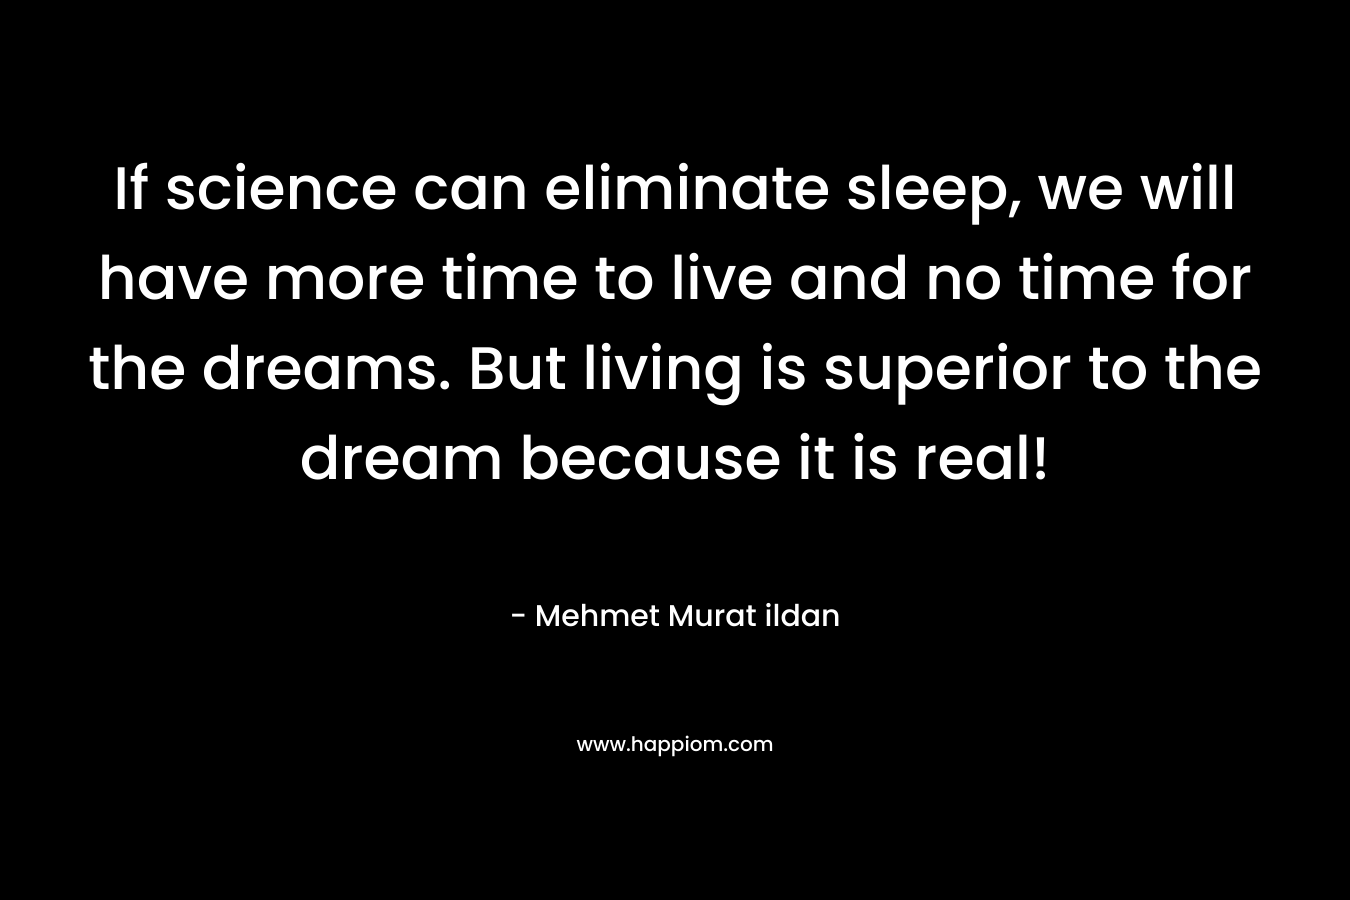 If science can eliminate sleep, we will have more time to live and no time for the dreams. But living is superior to the dream because it is real!